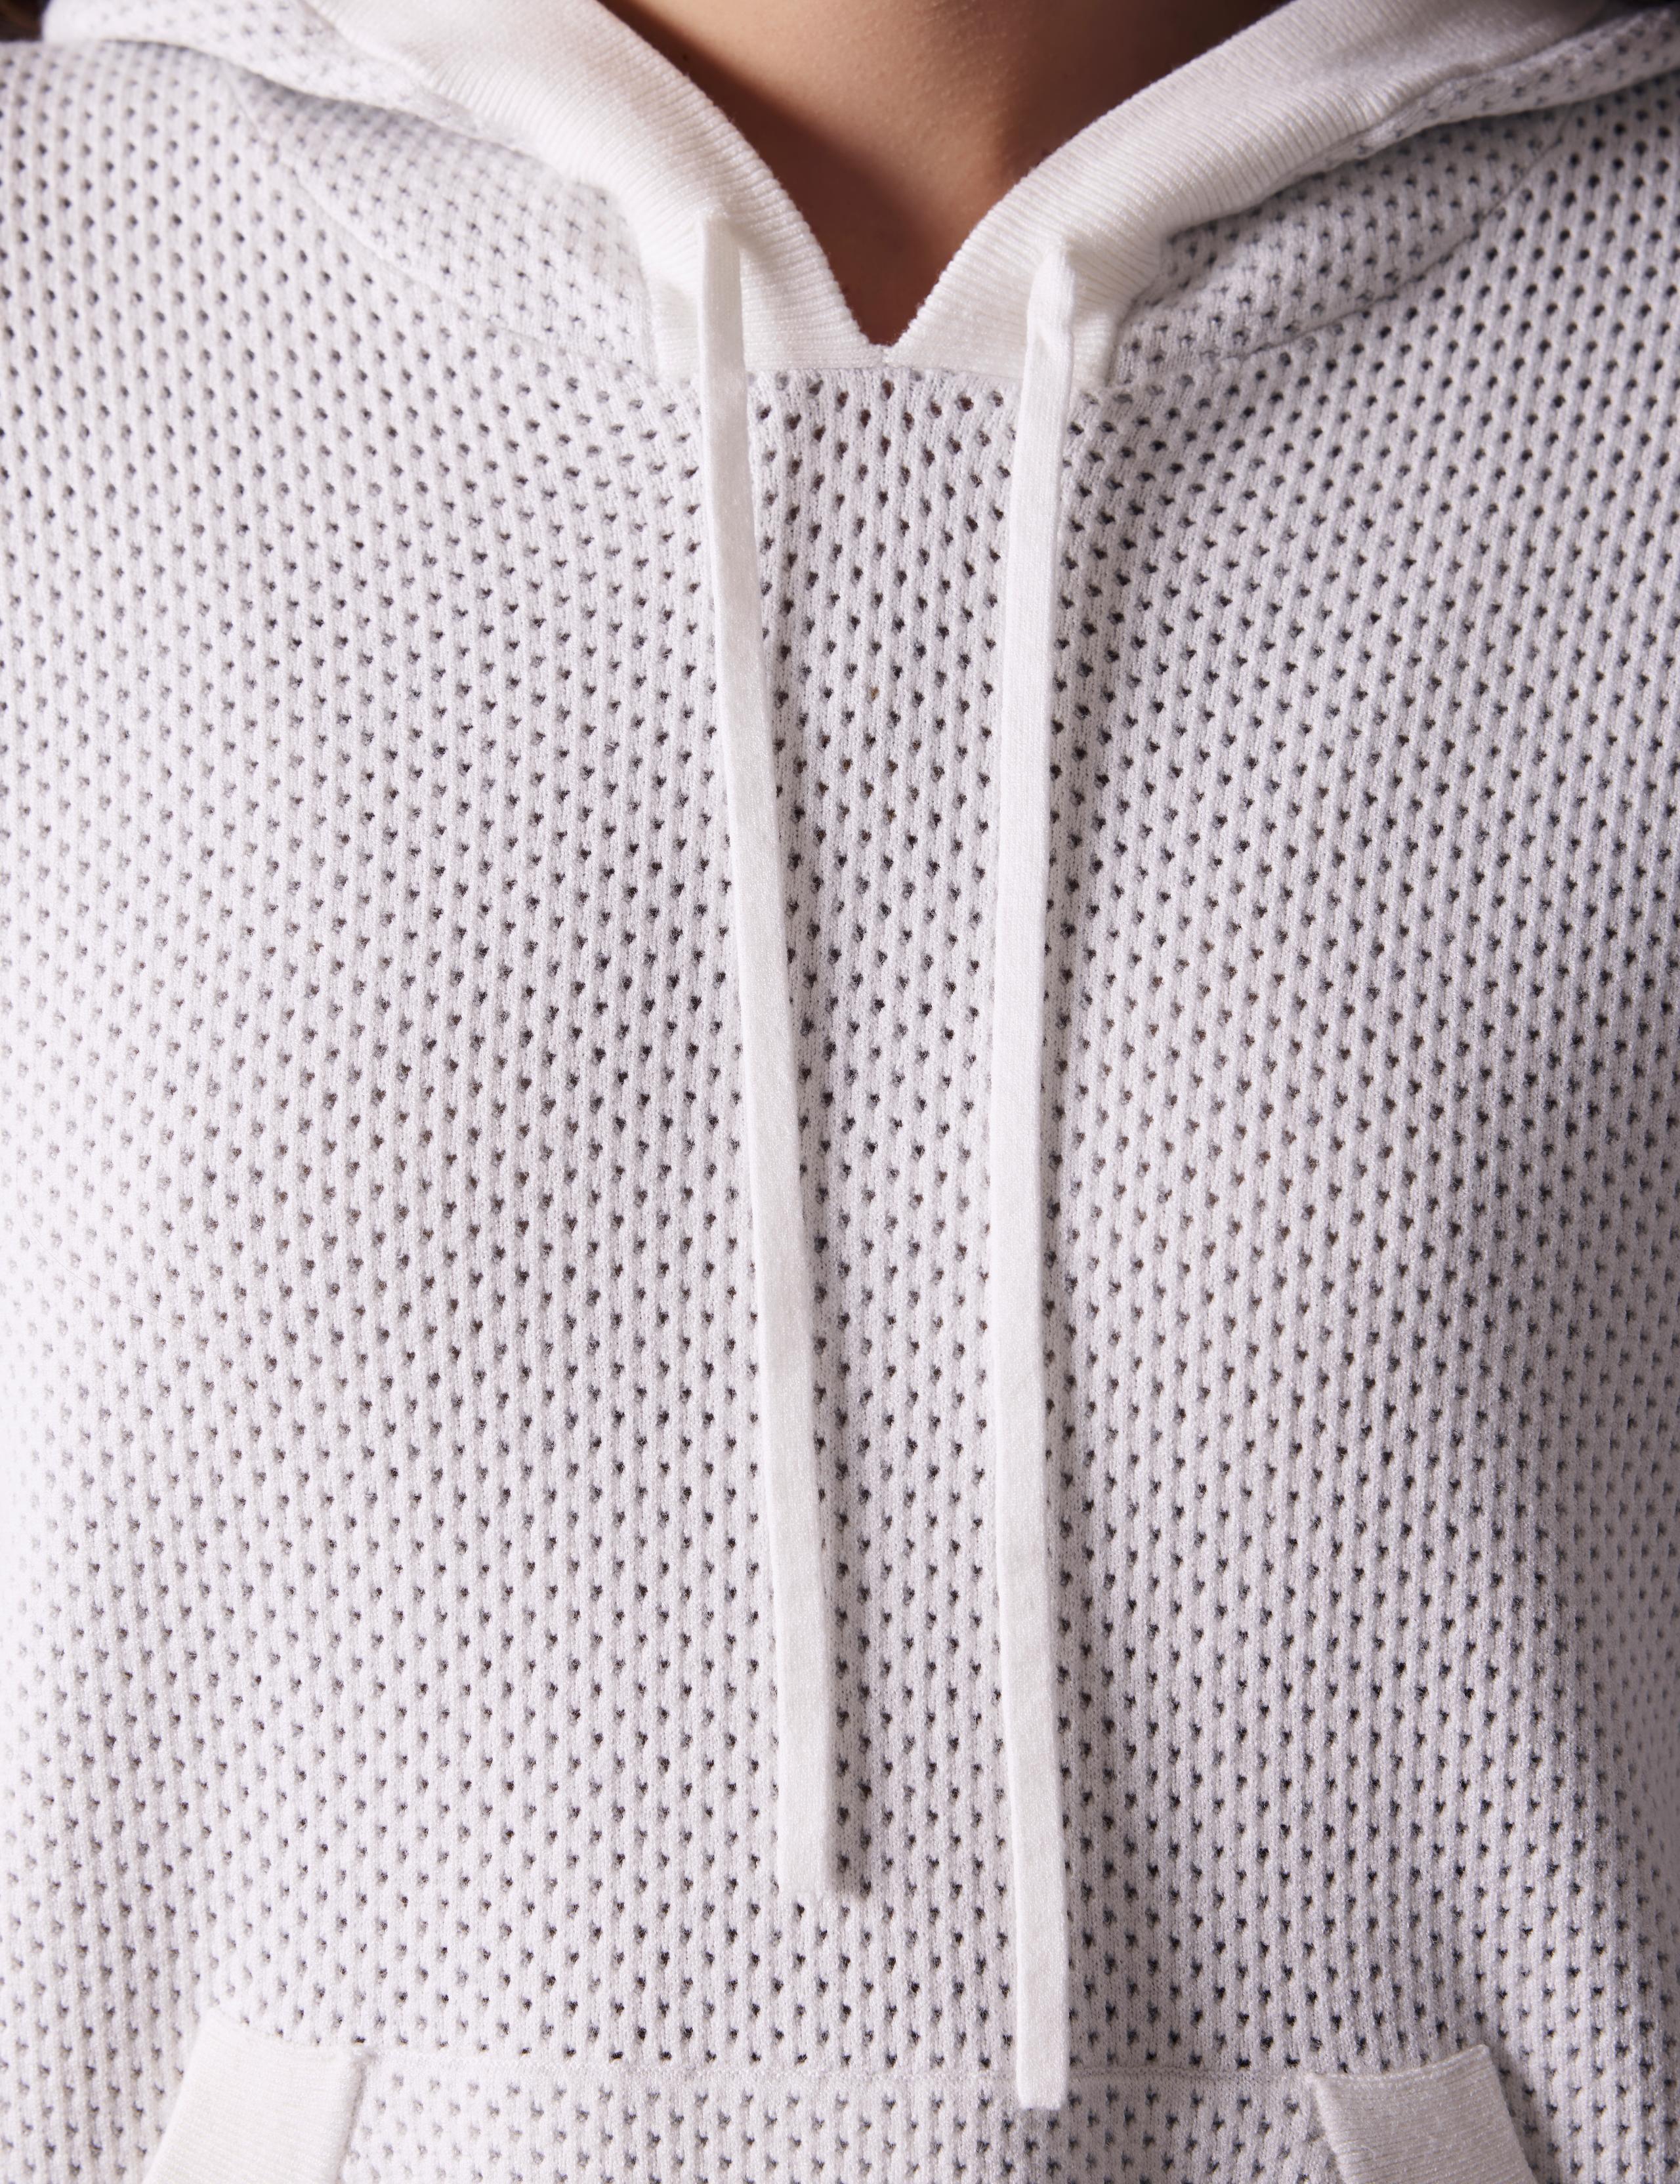 detailed shot of Baja Mesh Sweater's knitted drawcord.